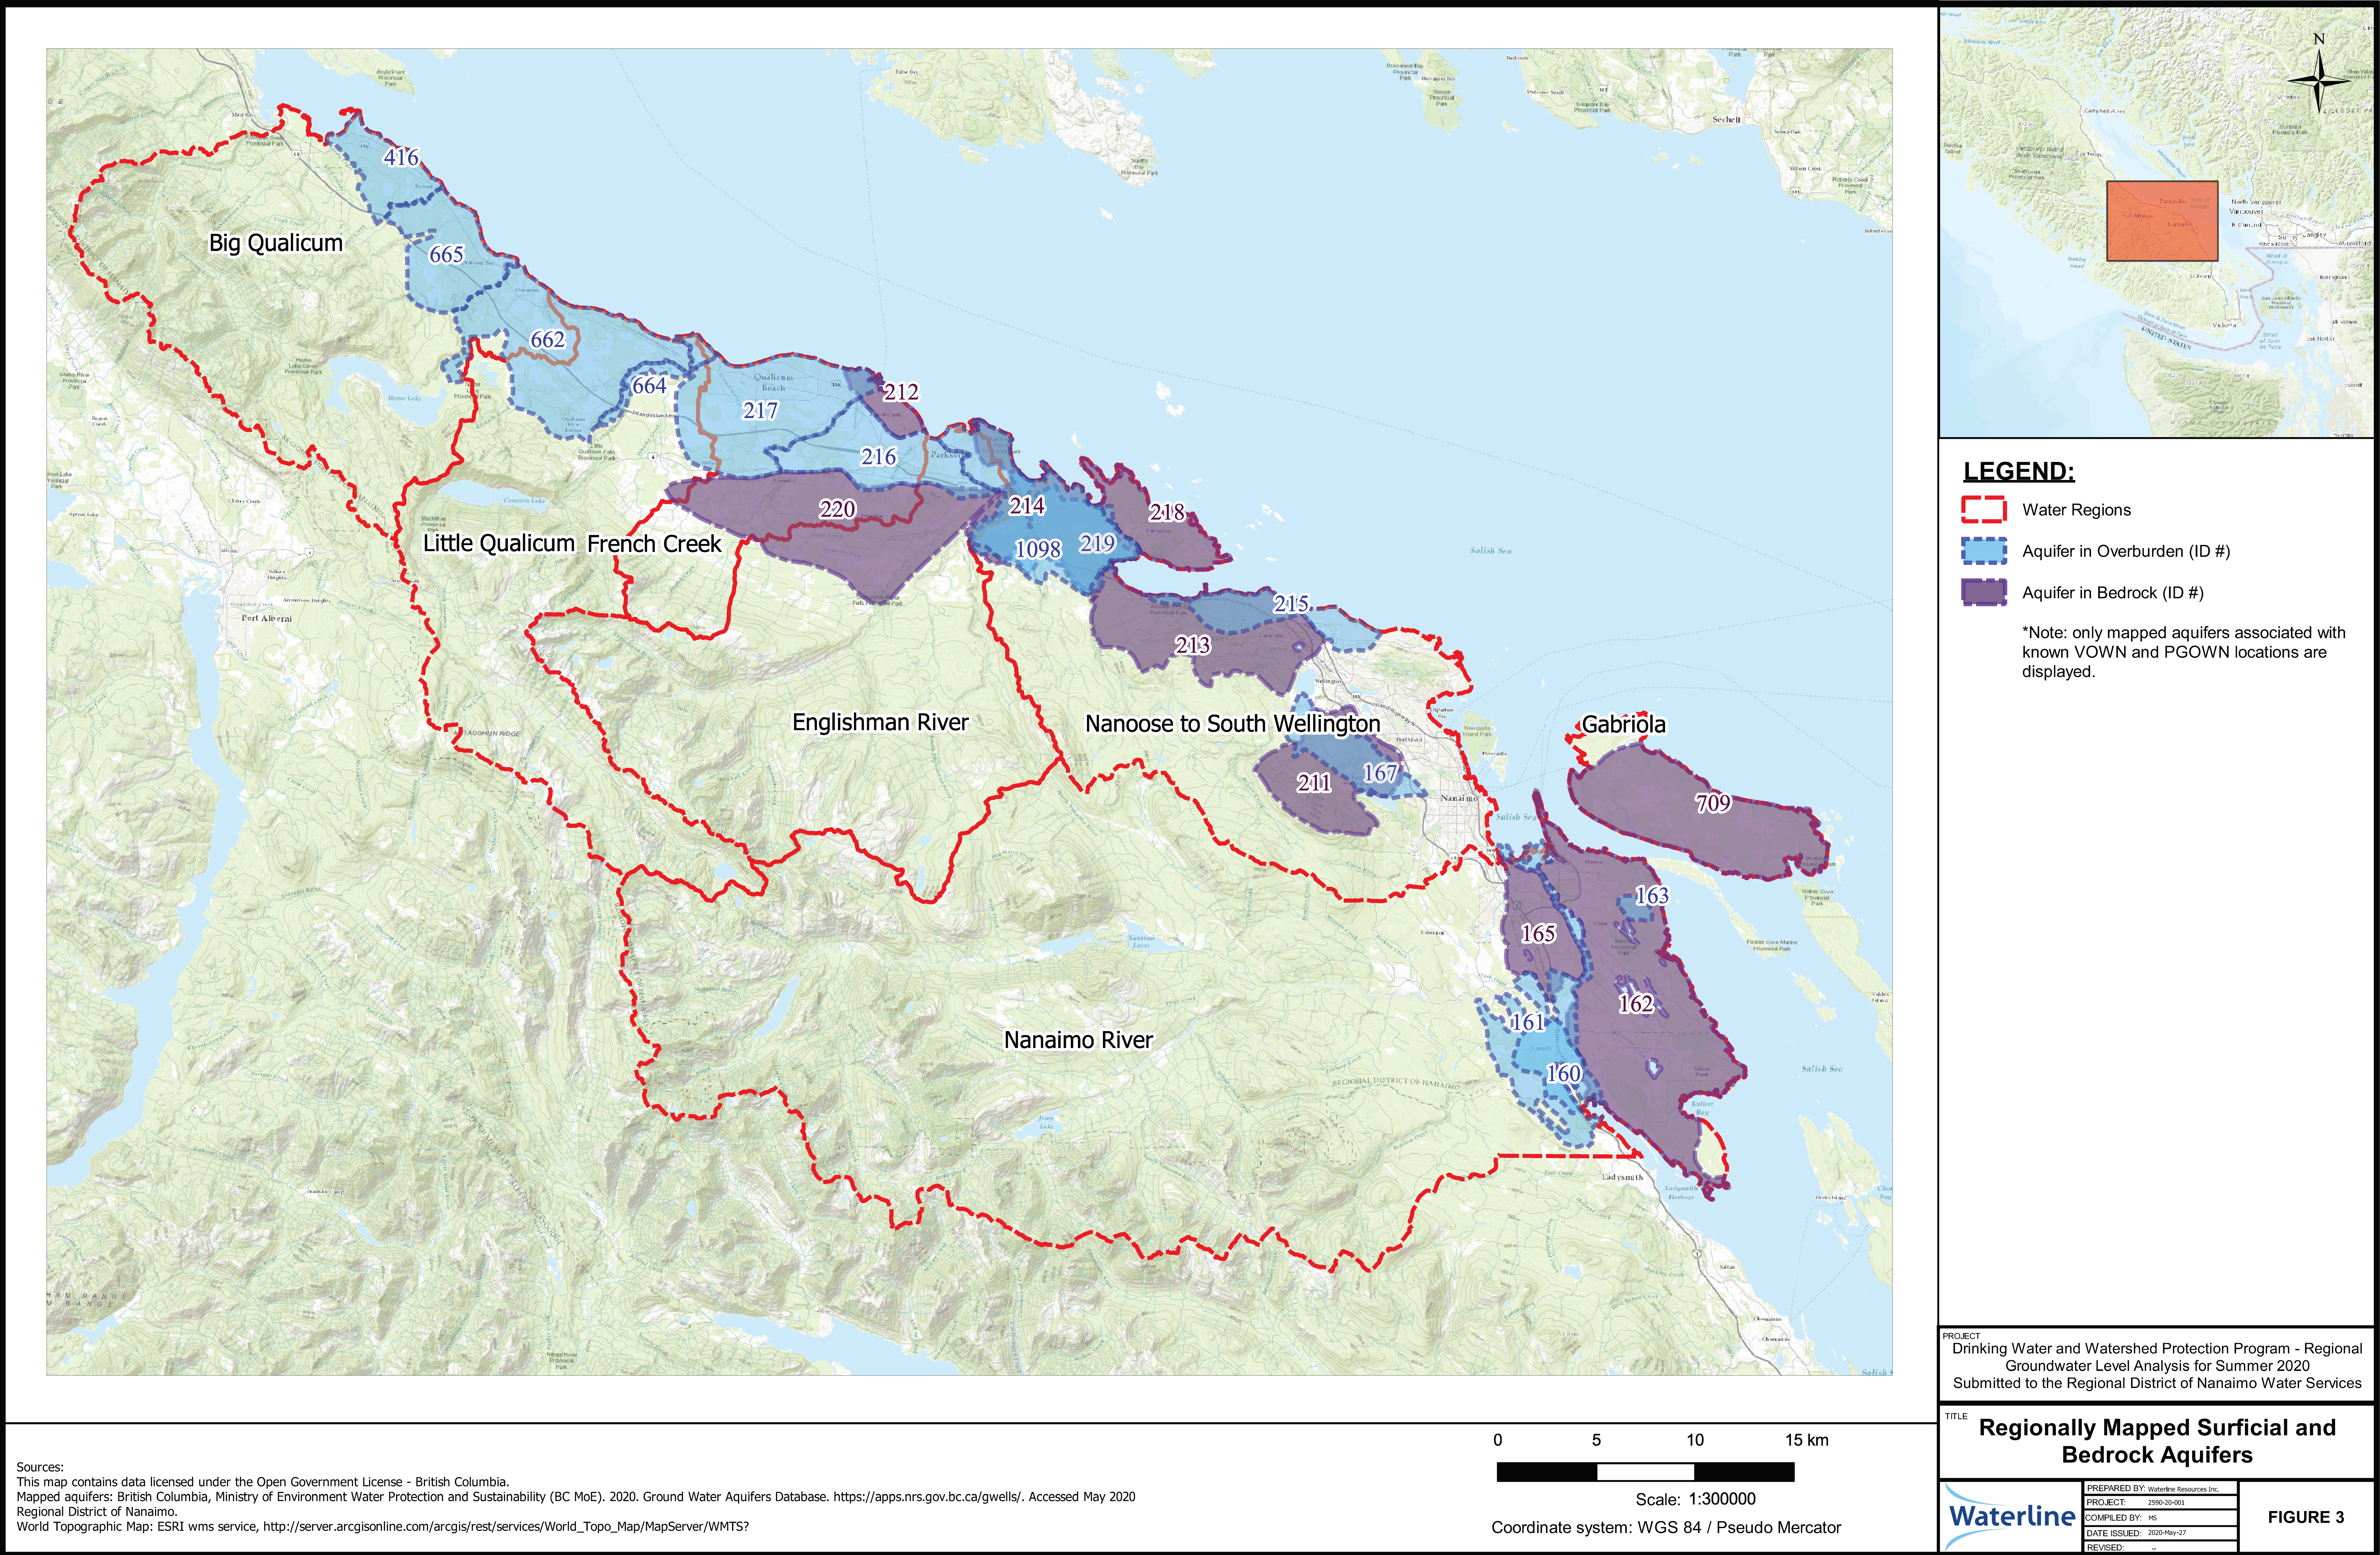 Provincially mapped aquifers within the RDN